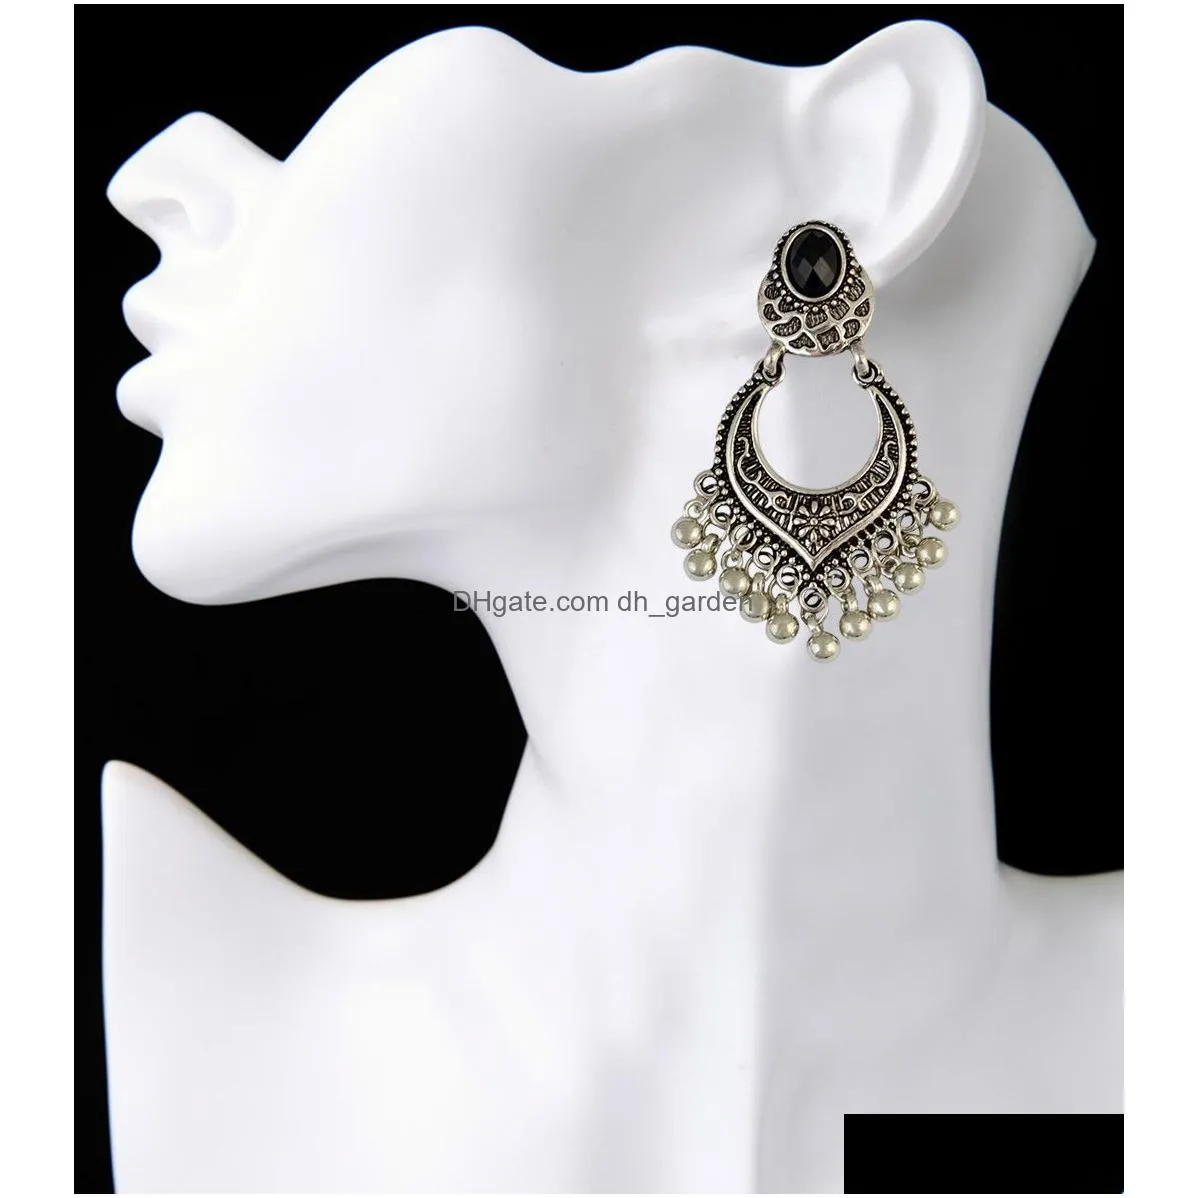 Fashion Bohemian Vintage Gold Silver Plated Carving Drop Shape Dangle Earrings For women Jewelry